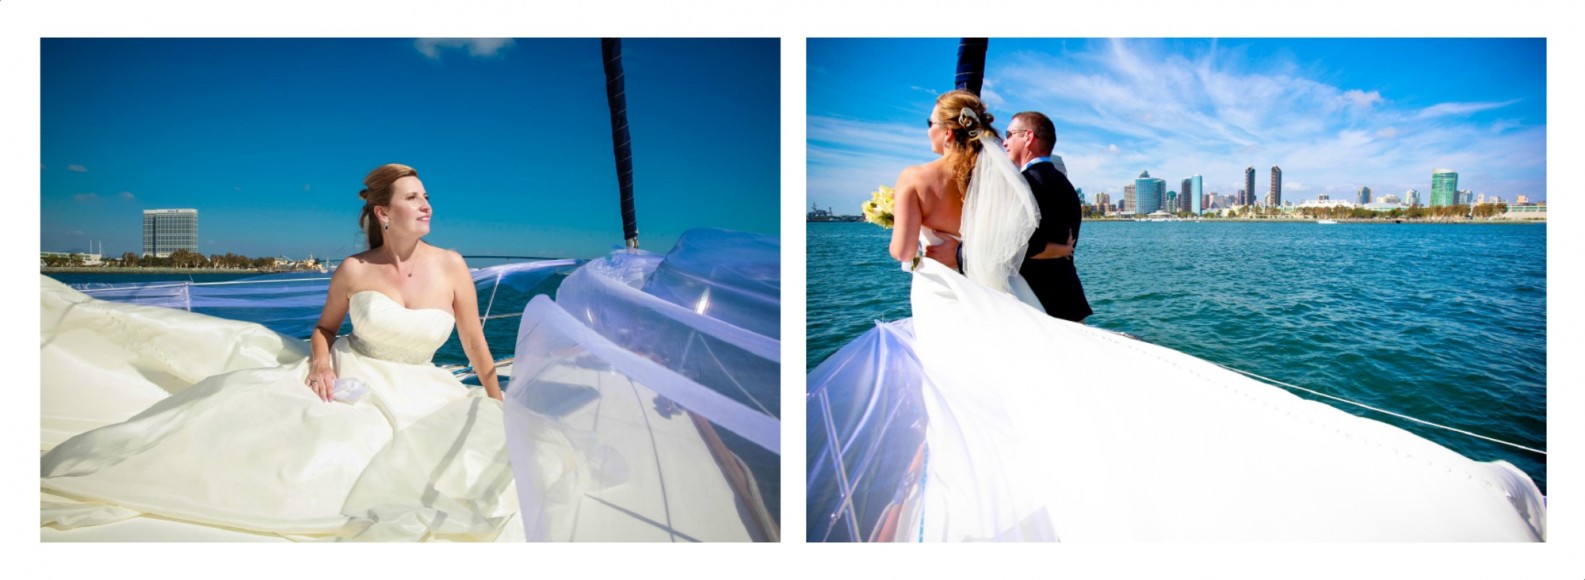 Laura and Davids Wedding Book - San Diego Yacht Wedding by Wedding Photographers Andrew Abouna - Pages 26-27